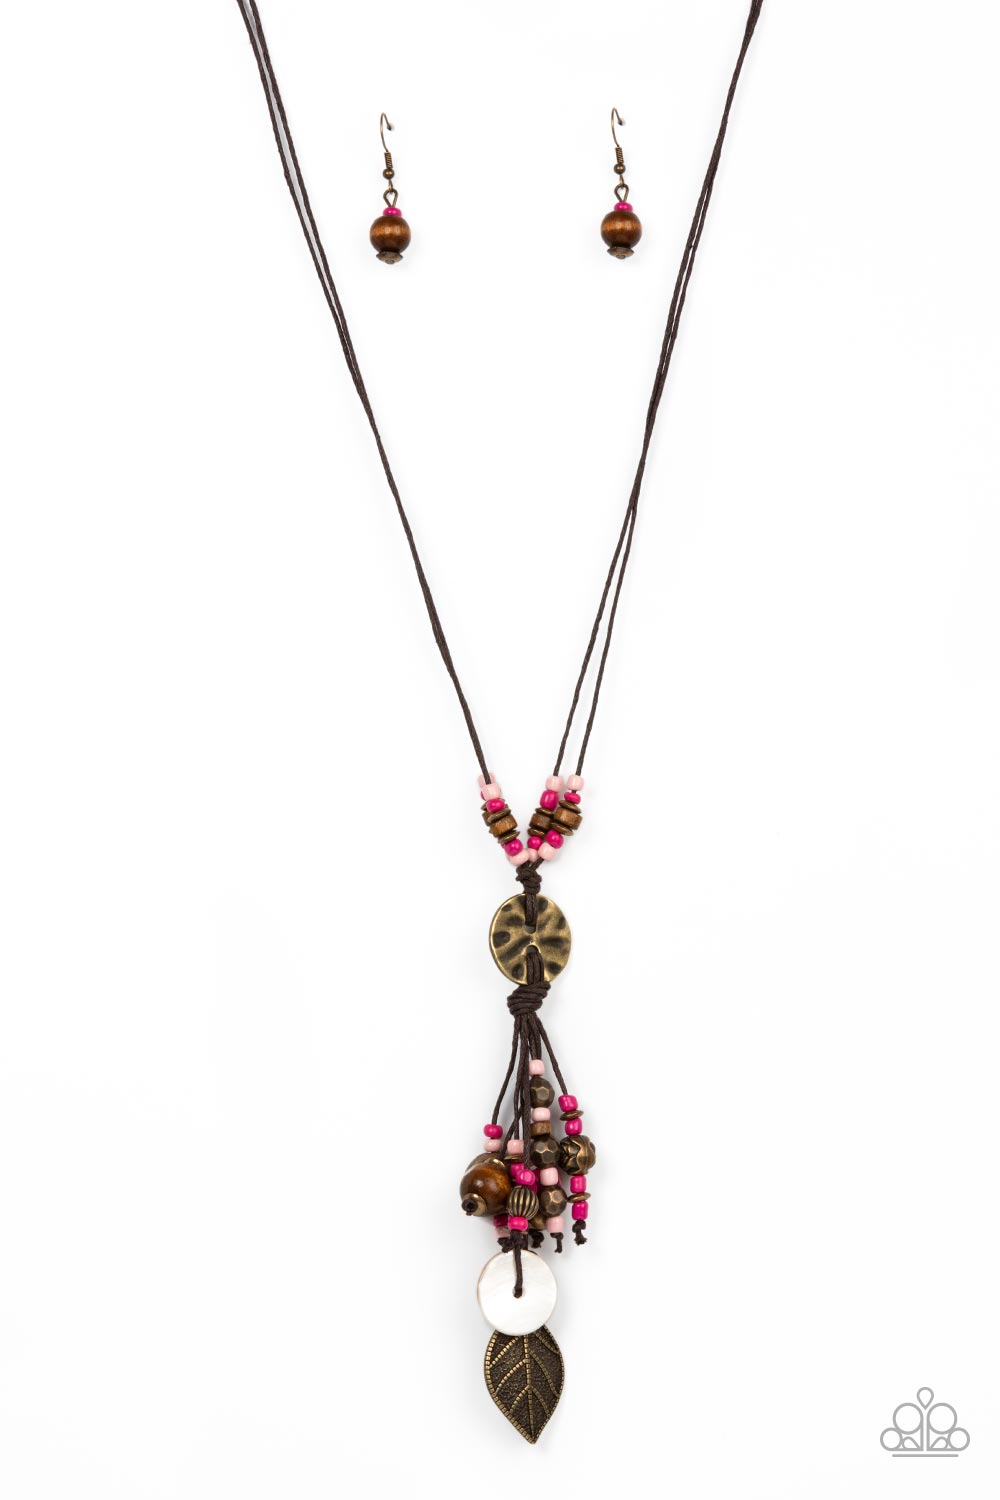 five-dollar-jewelry-knotted-keepsake-pink-necklace-paparazzi-accessories